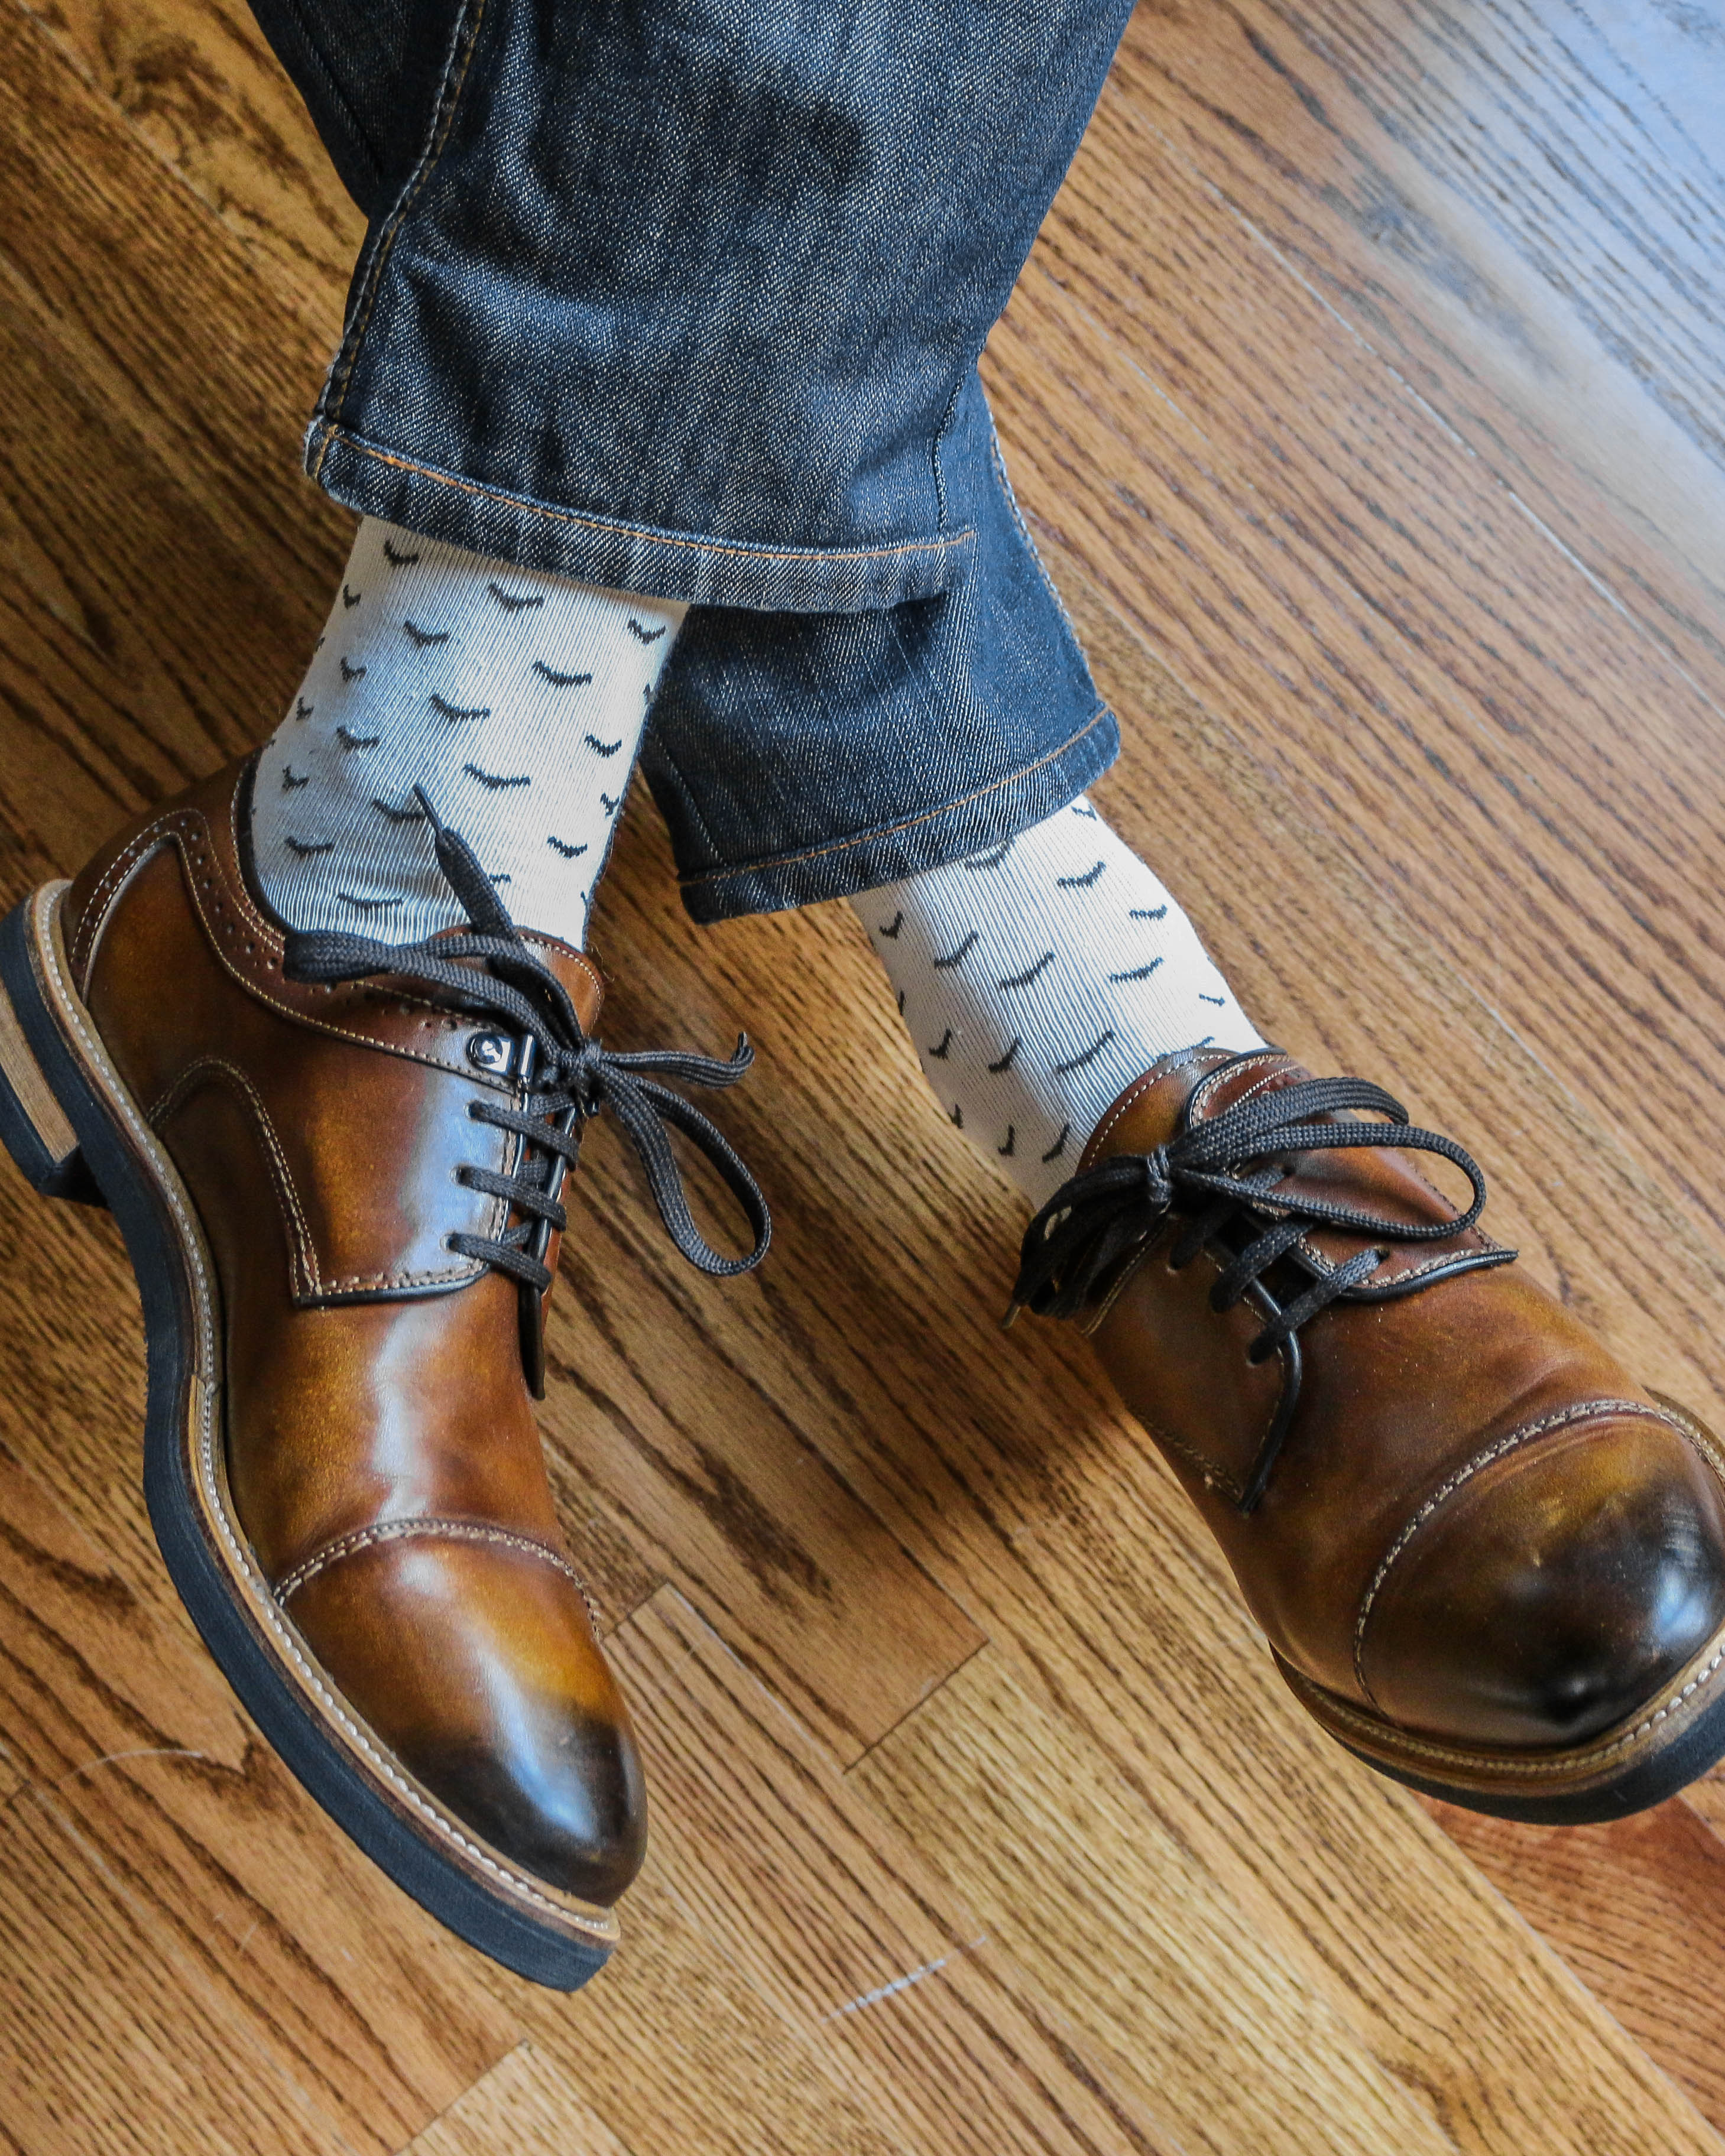 white over the calf dress socks with black prints, brown dress shoes, blue jeans